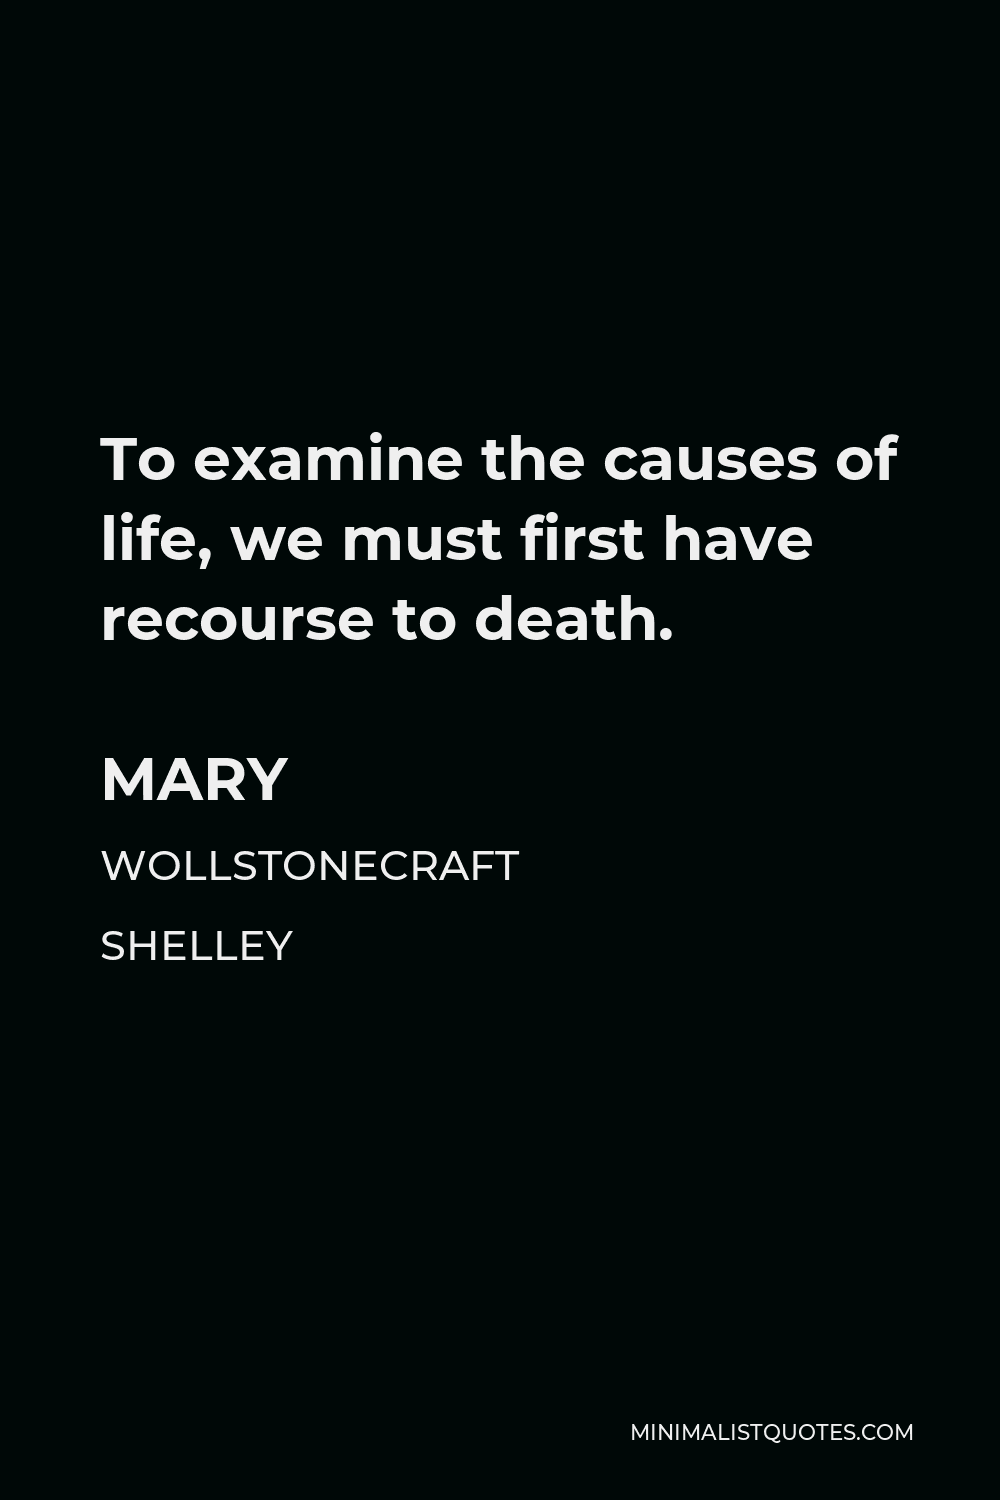 Mary Wollstonecraft Shelley Quote - To examine the causes of life, we must first have recourse to death.